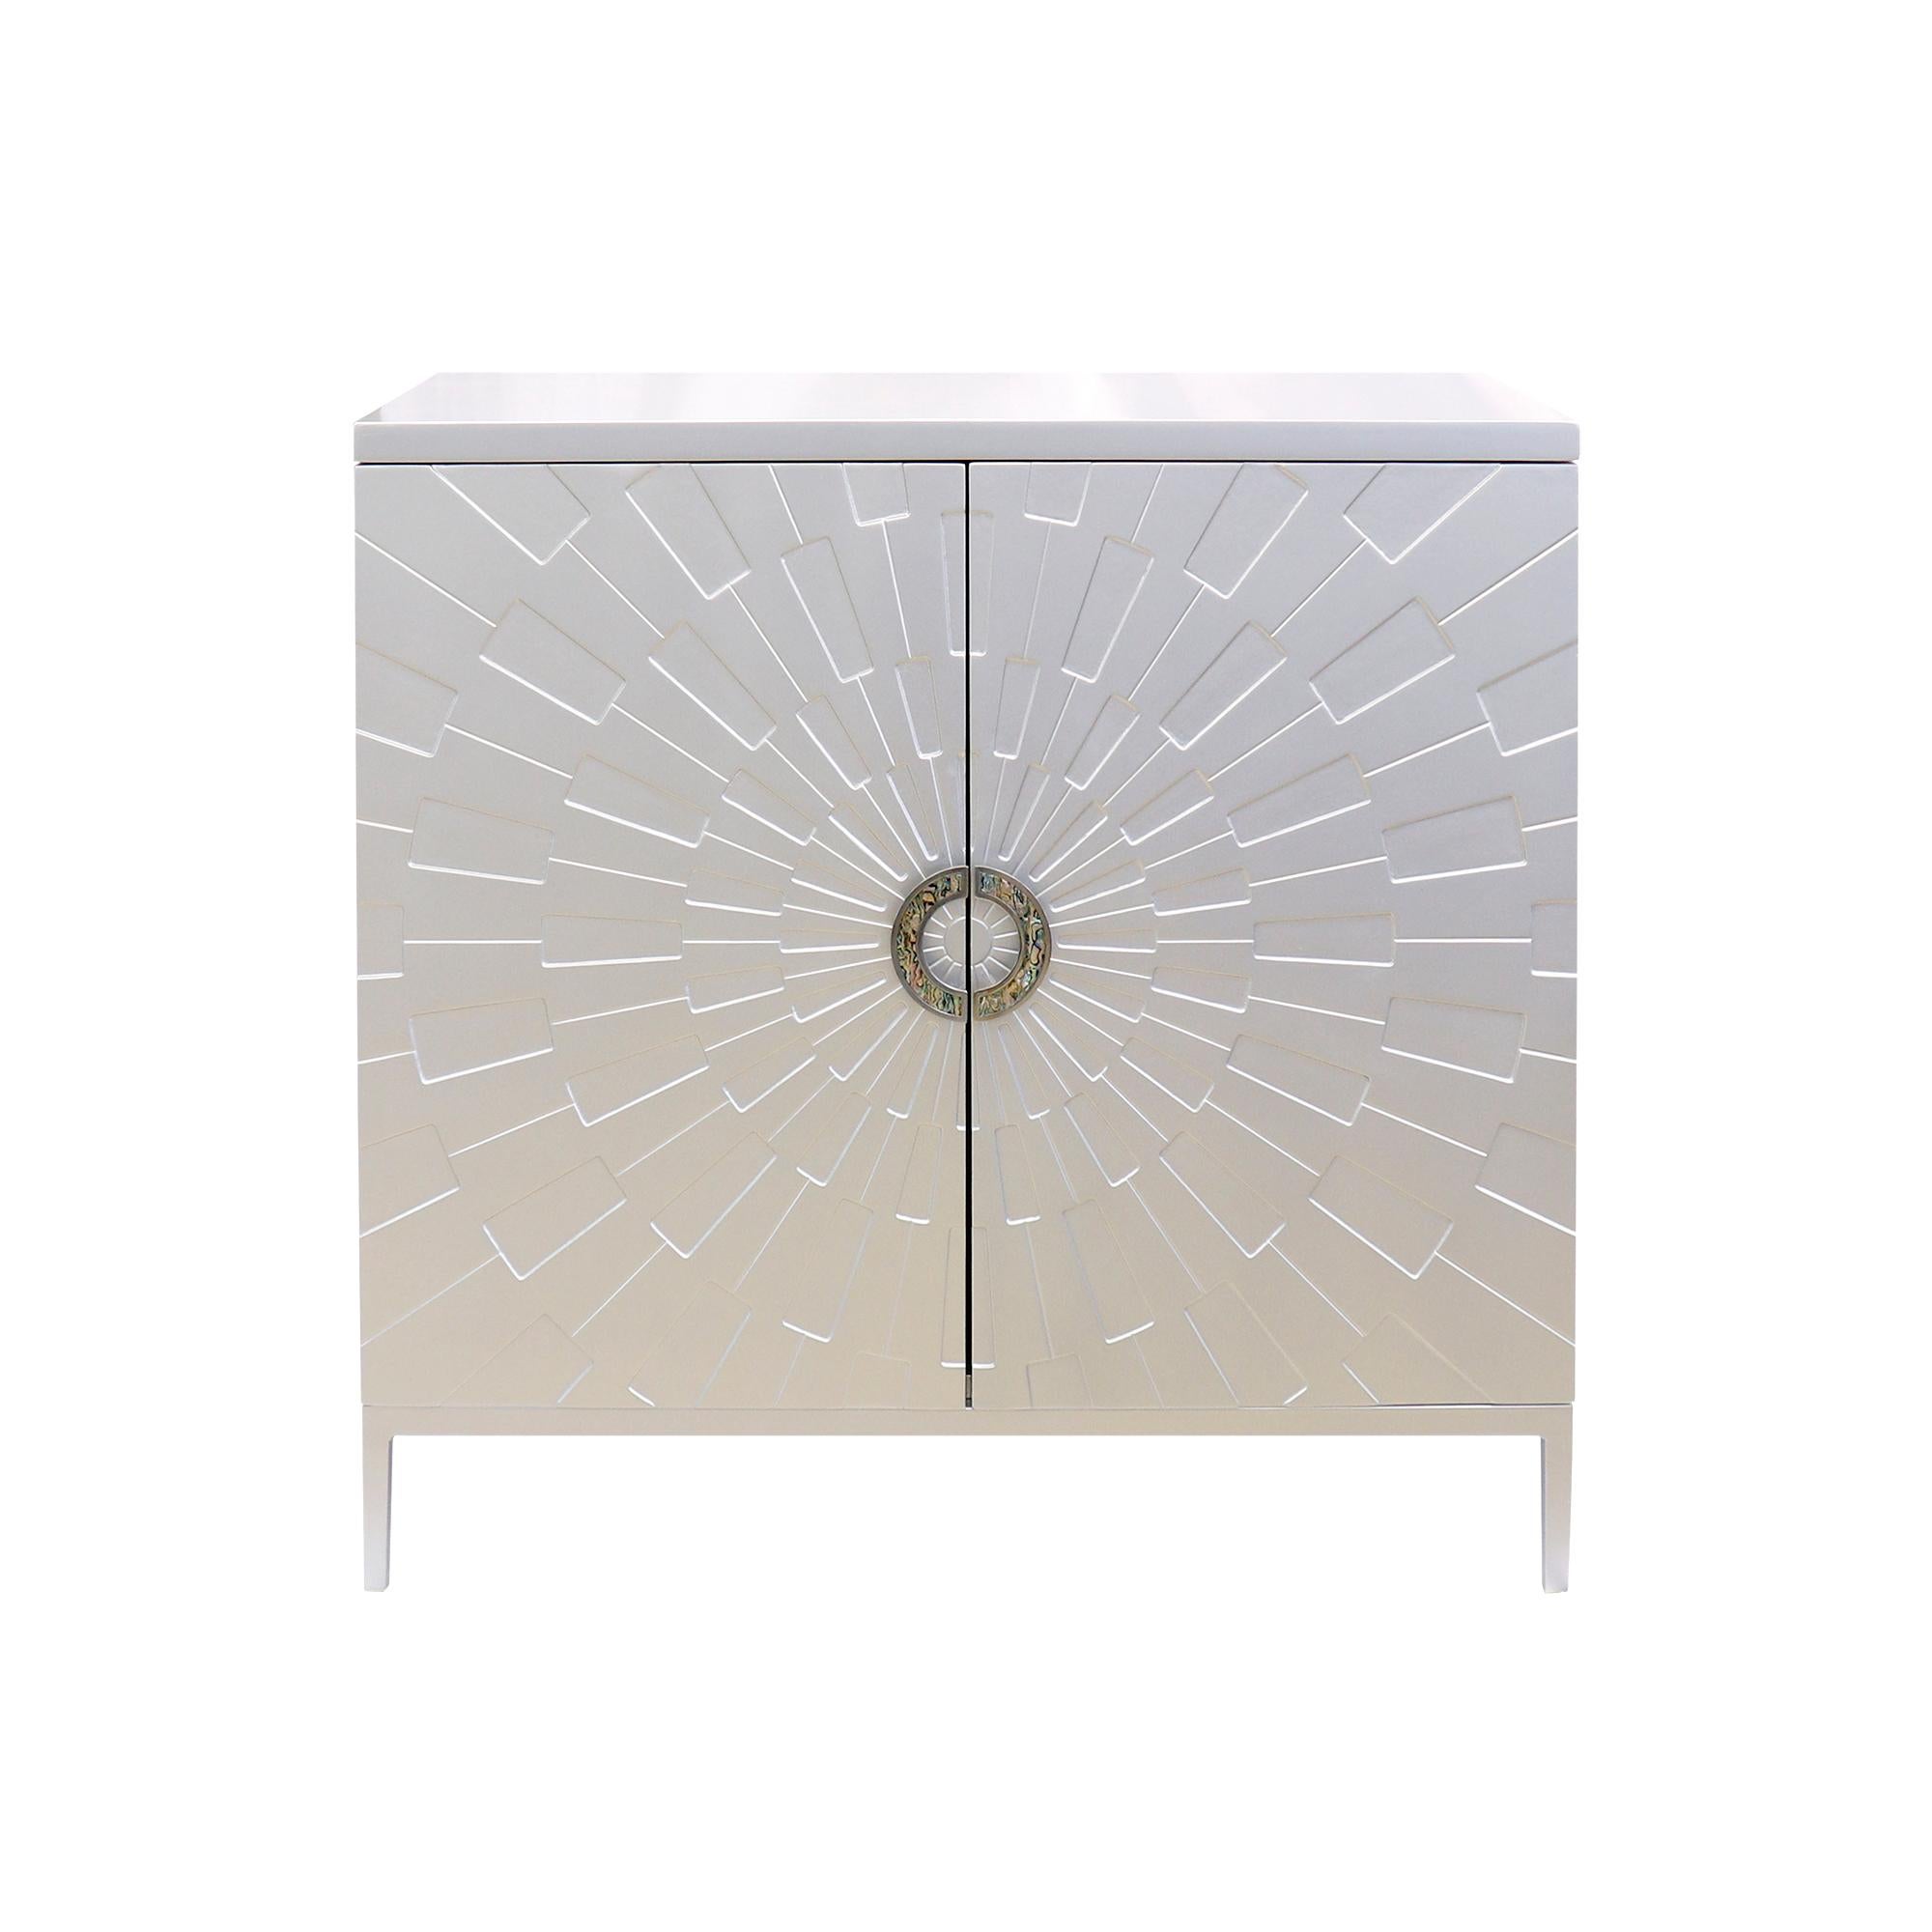 Introducing our stunning Calypso collection. A modern compilation of stunning bar cabinets, nightstands and sideboards. Composed of bright, decorative finishes over MDF wood construction these fabulous pieces exude glamour. These contemporary pieces